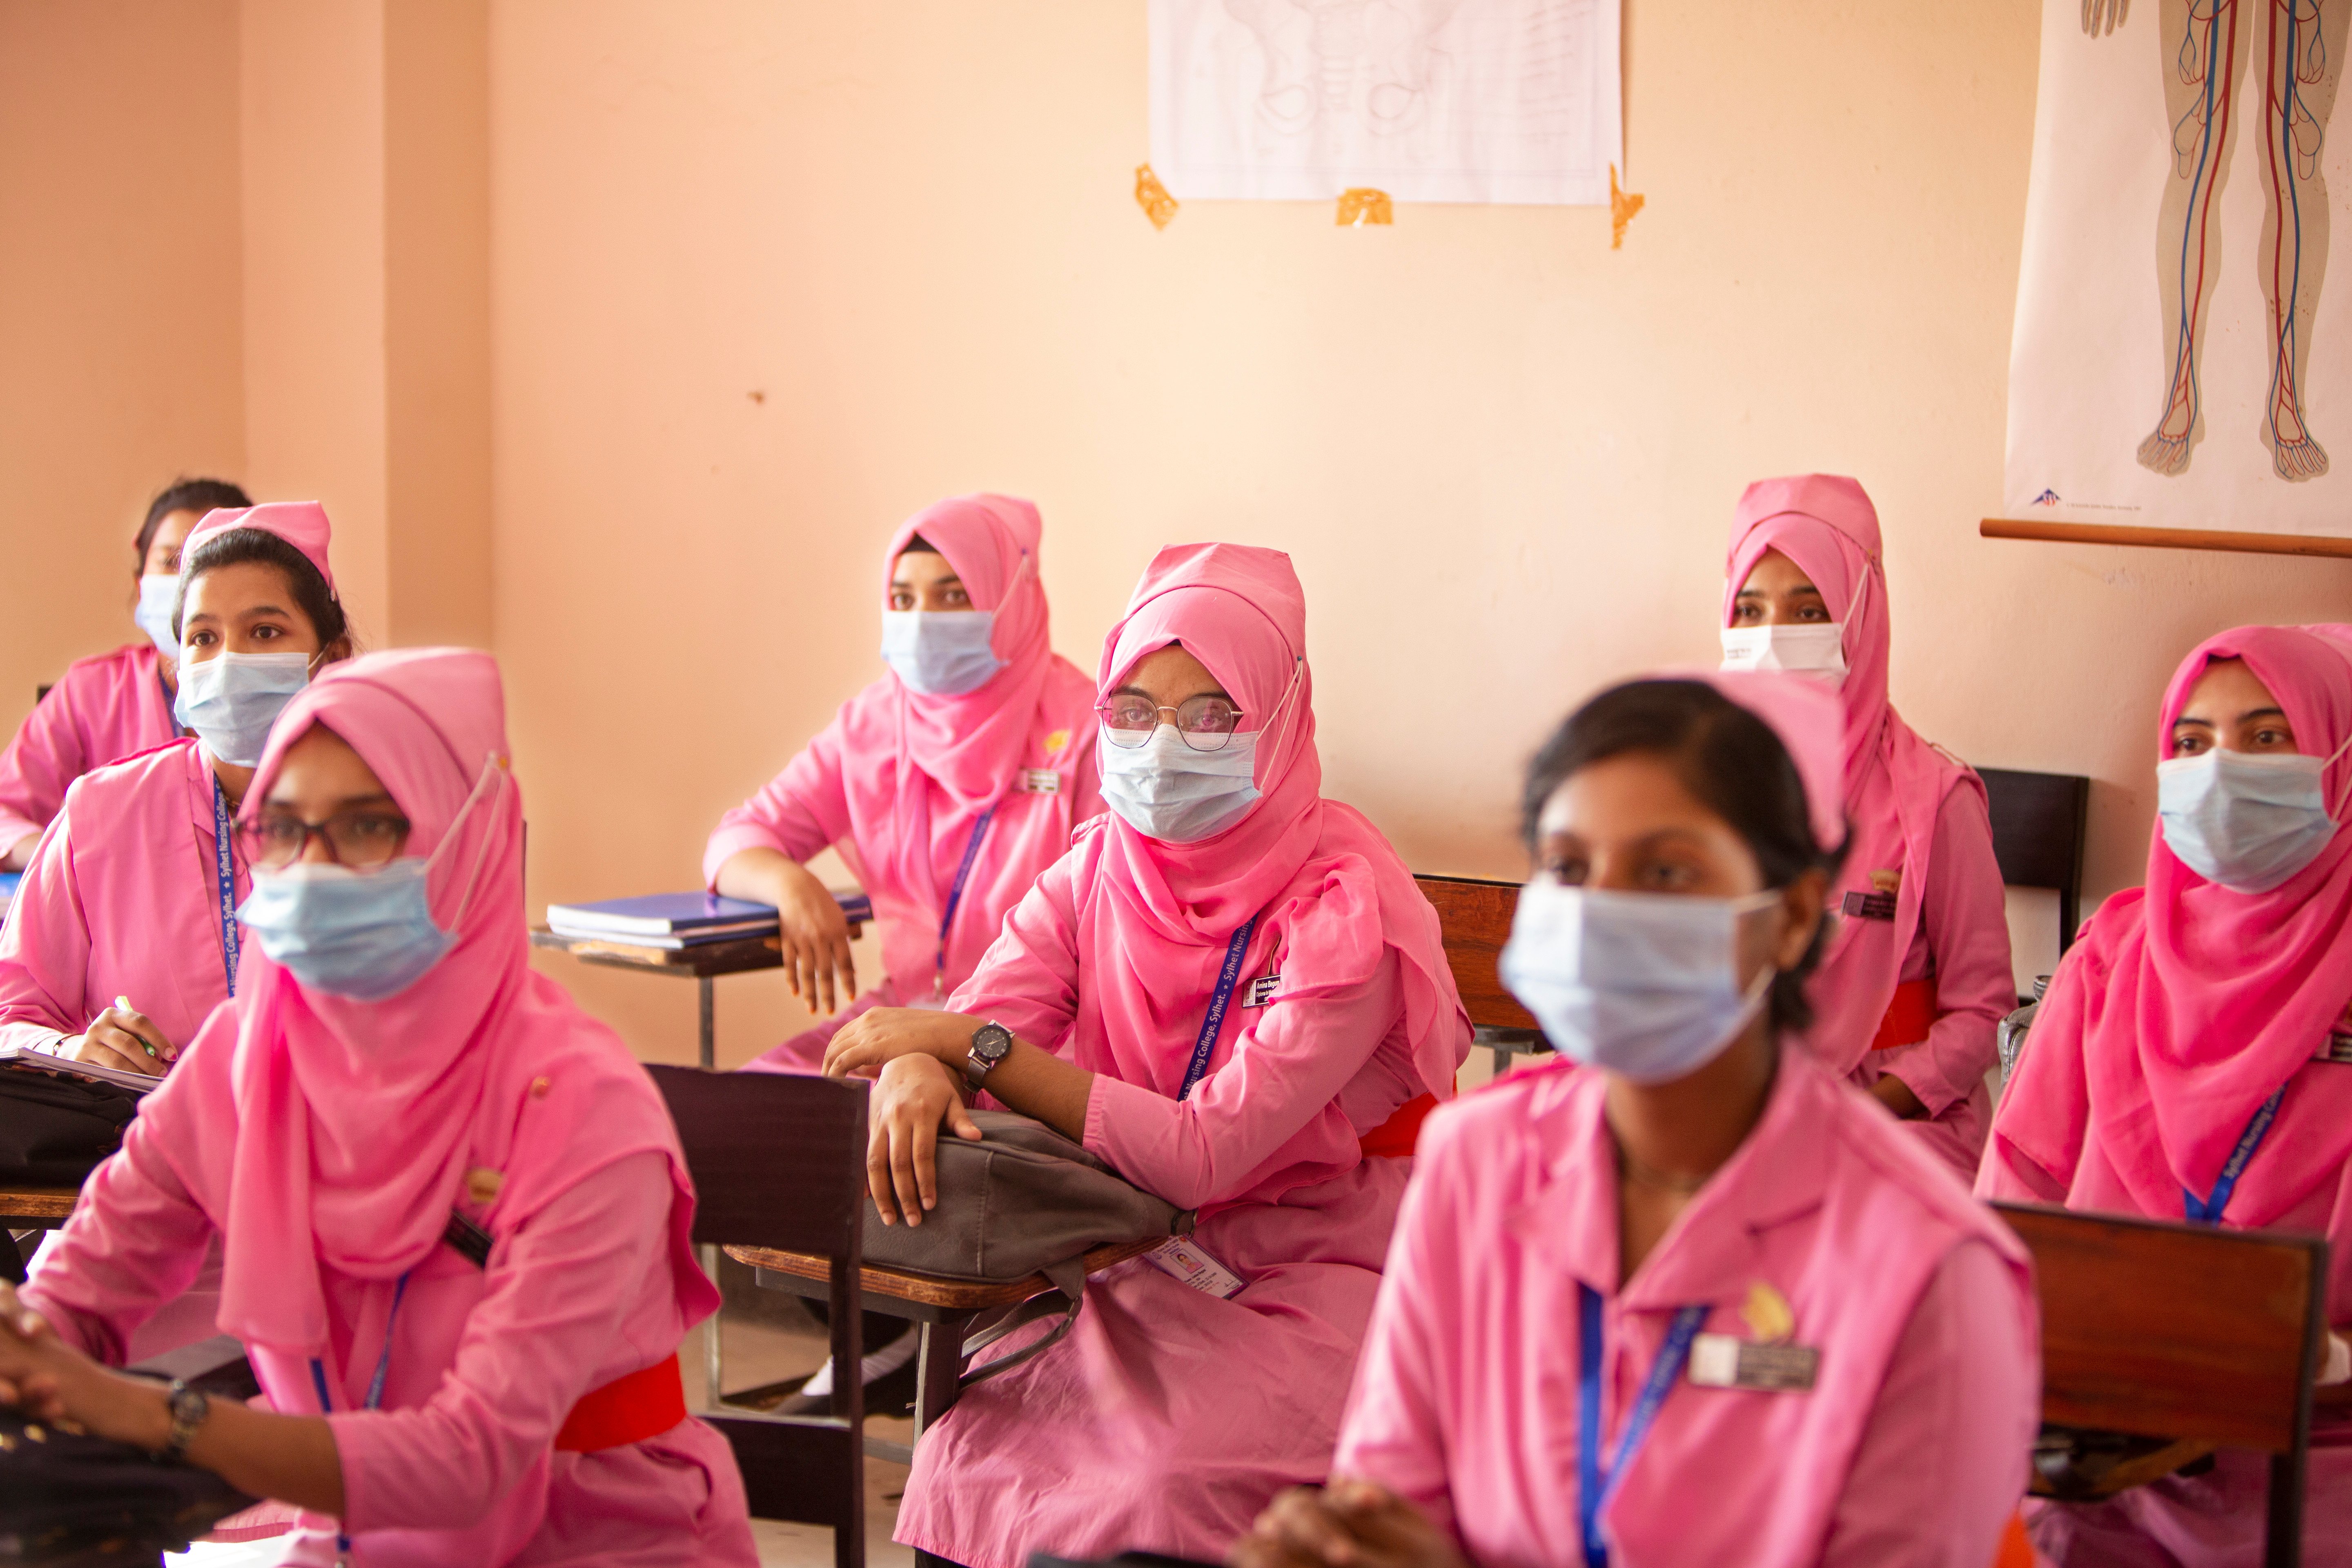 Photo of a classroom of midwife students dressed in pink uniforms in Bangladesh